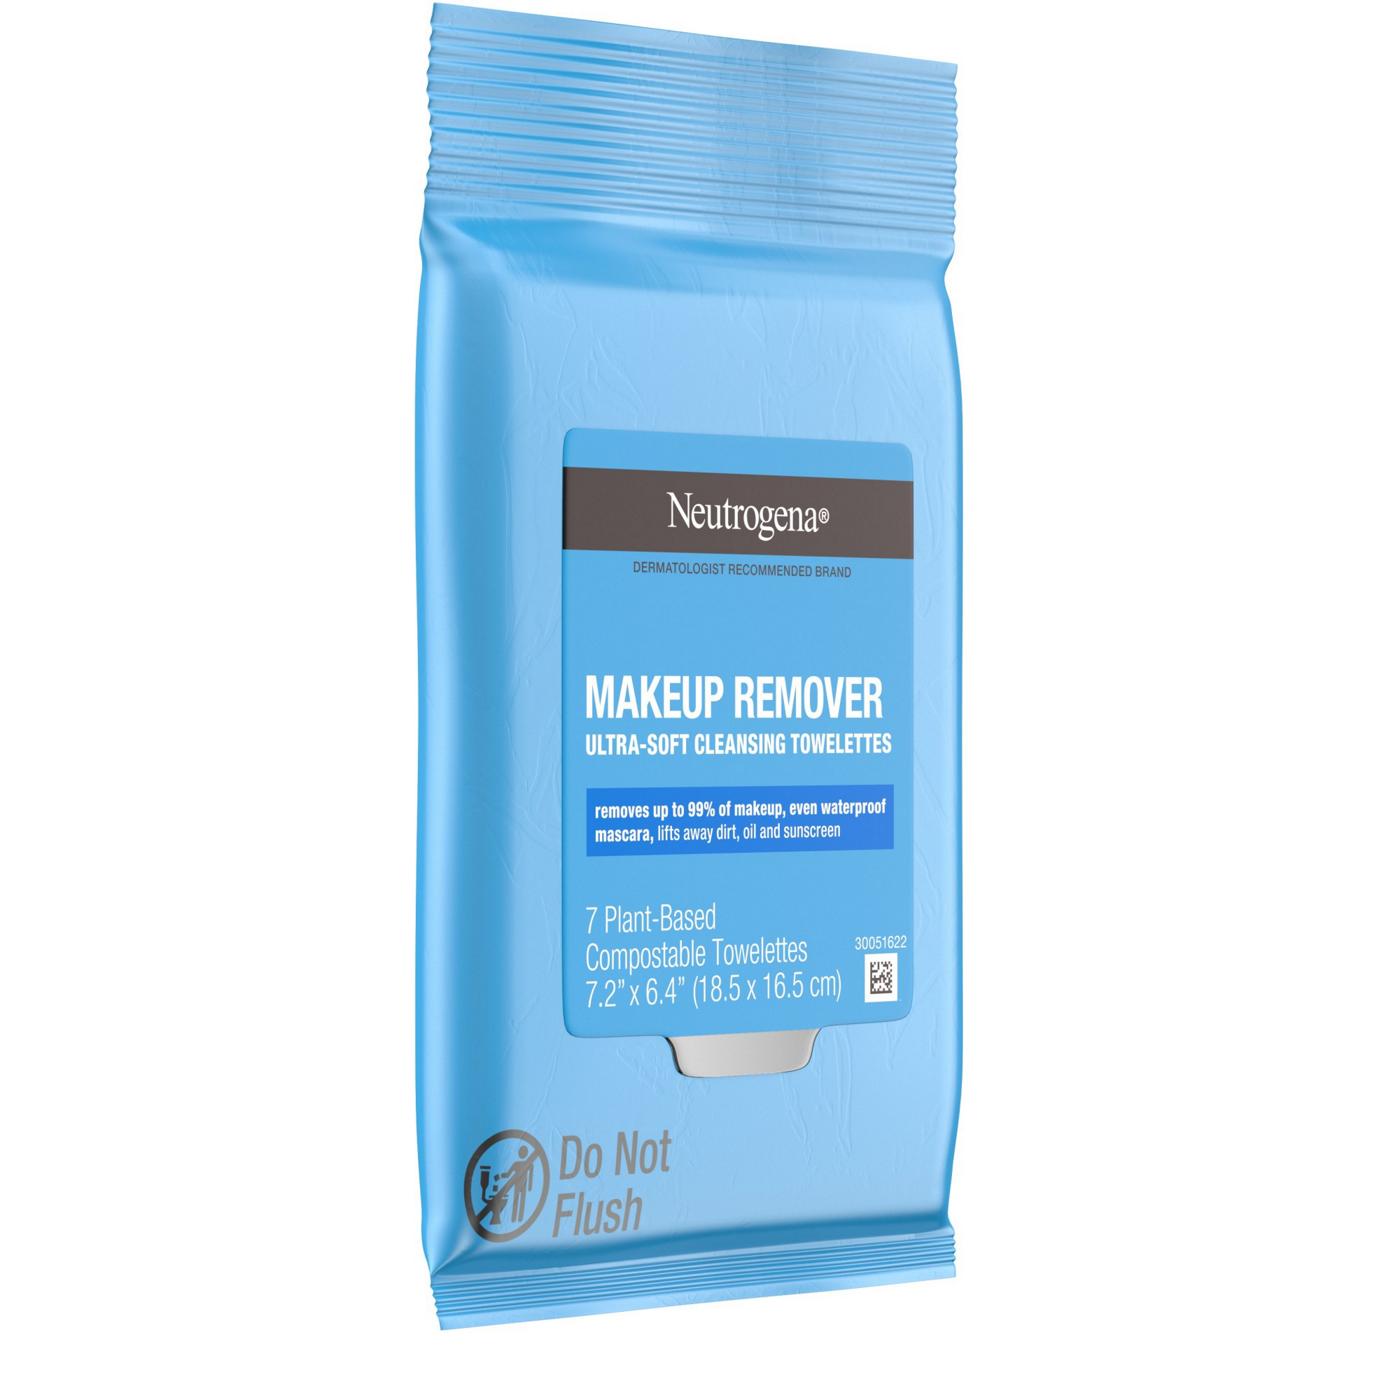 Neutrogena Makeup Remover Cleansing Towelettes; image 2 of 4